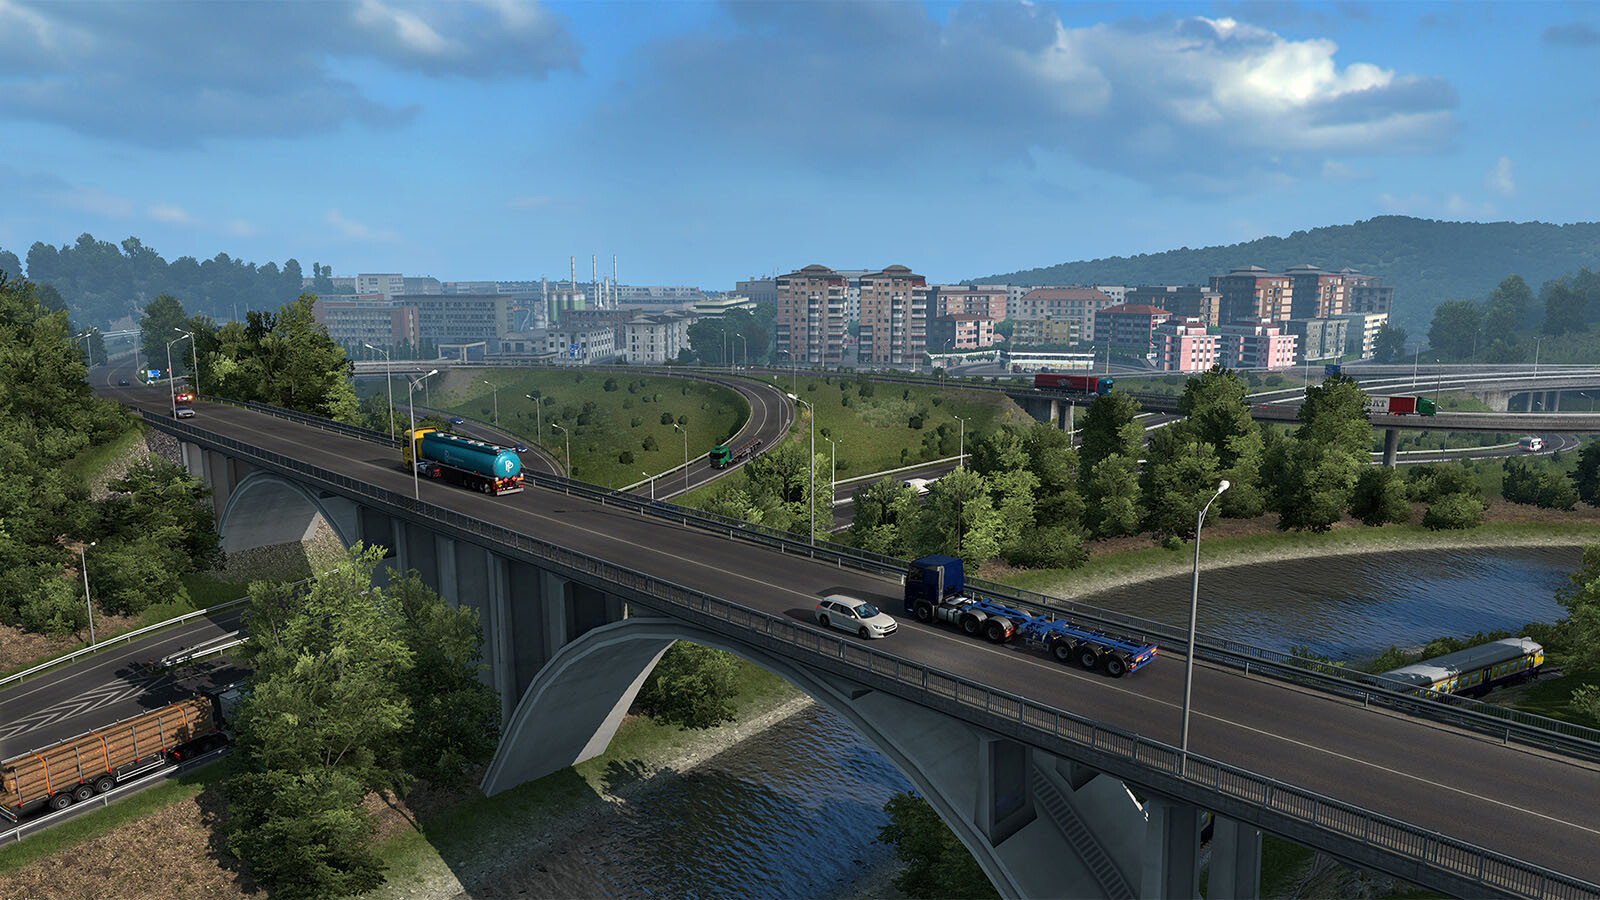 Euro Truck Simulator 2 - Road to the Black Sea Steam Key for PC, Mac and  Linux - Buy now